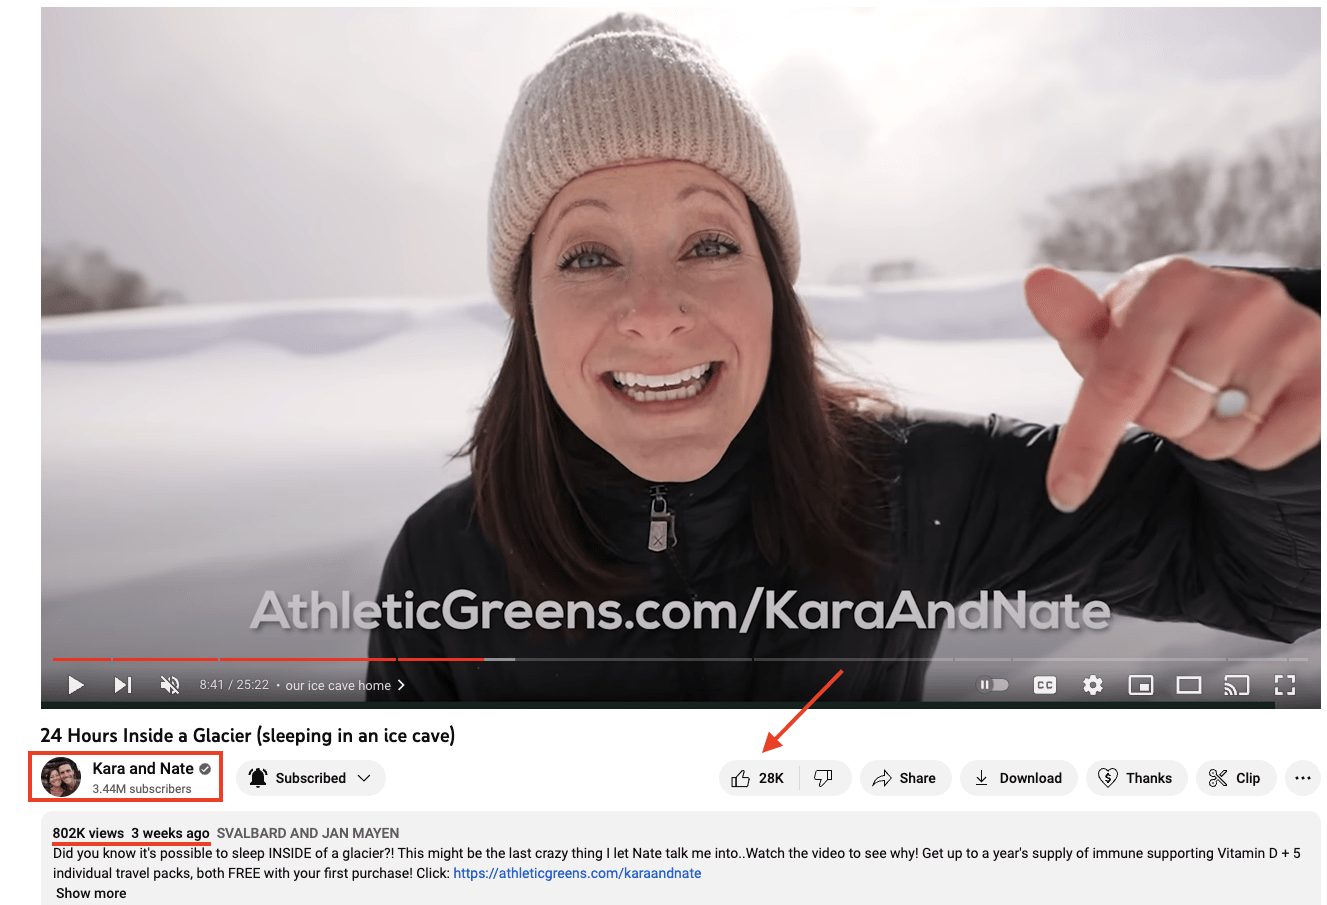 Athletic Greens as a brand management strategy example